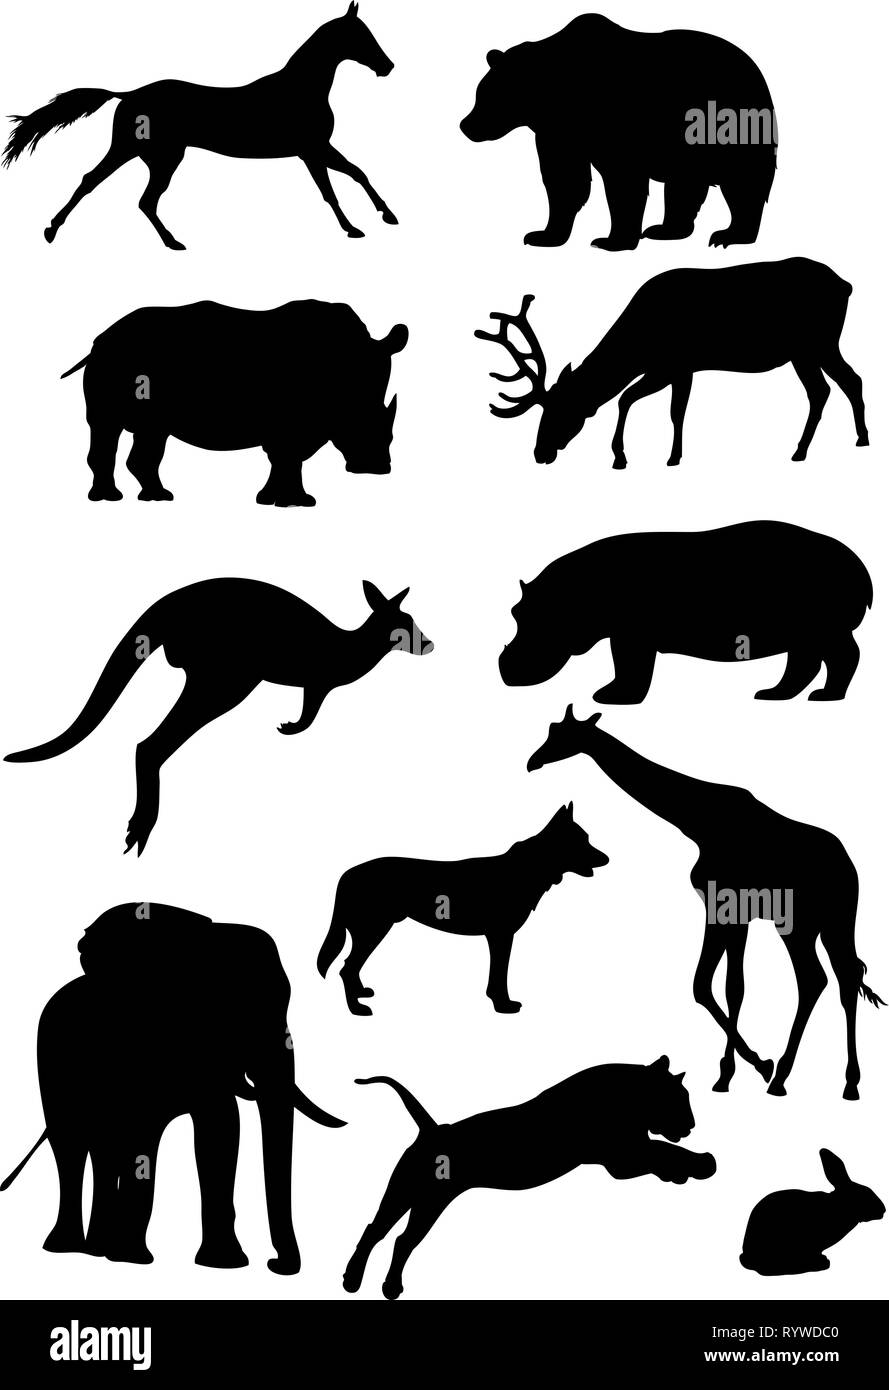 The illustration shows animals, some species of wild mammals. Illustration done in the style of contour drawing, isolated on white background Stock Vector